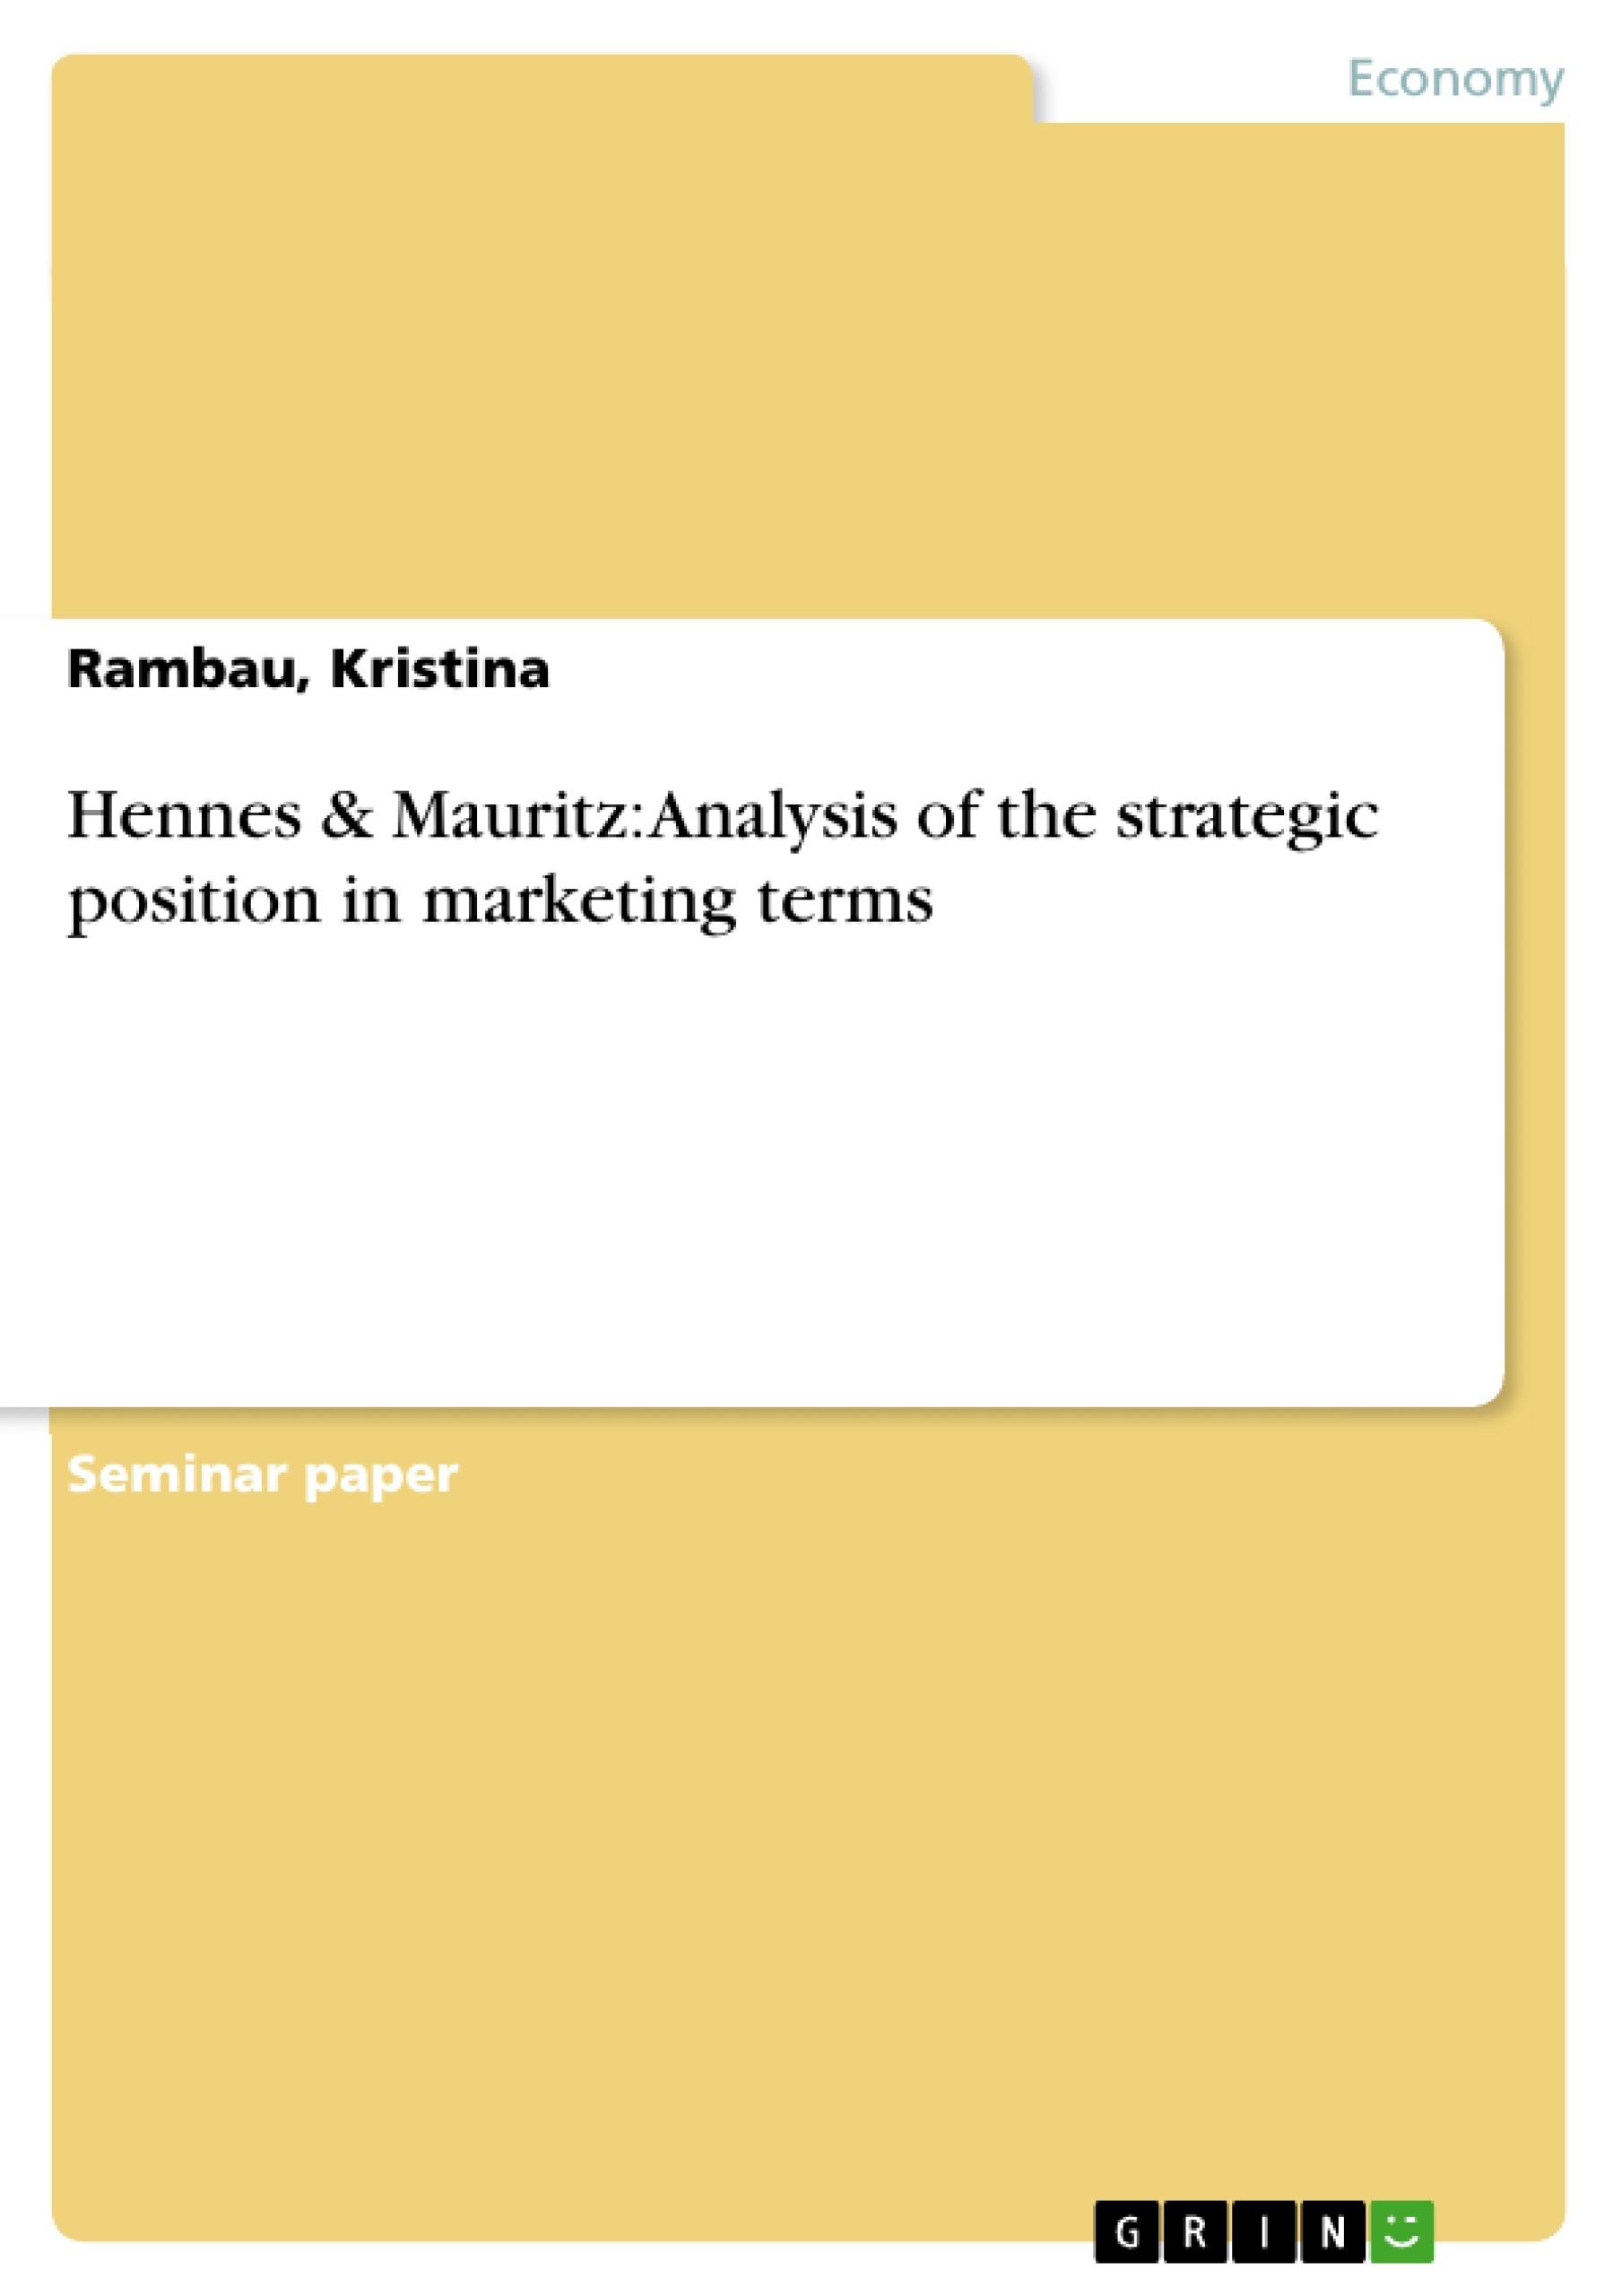 Title: Hennes & Mauritz: Analysis of the strategic position in marketing terms